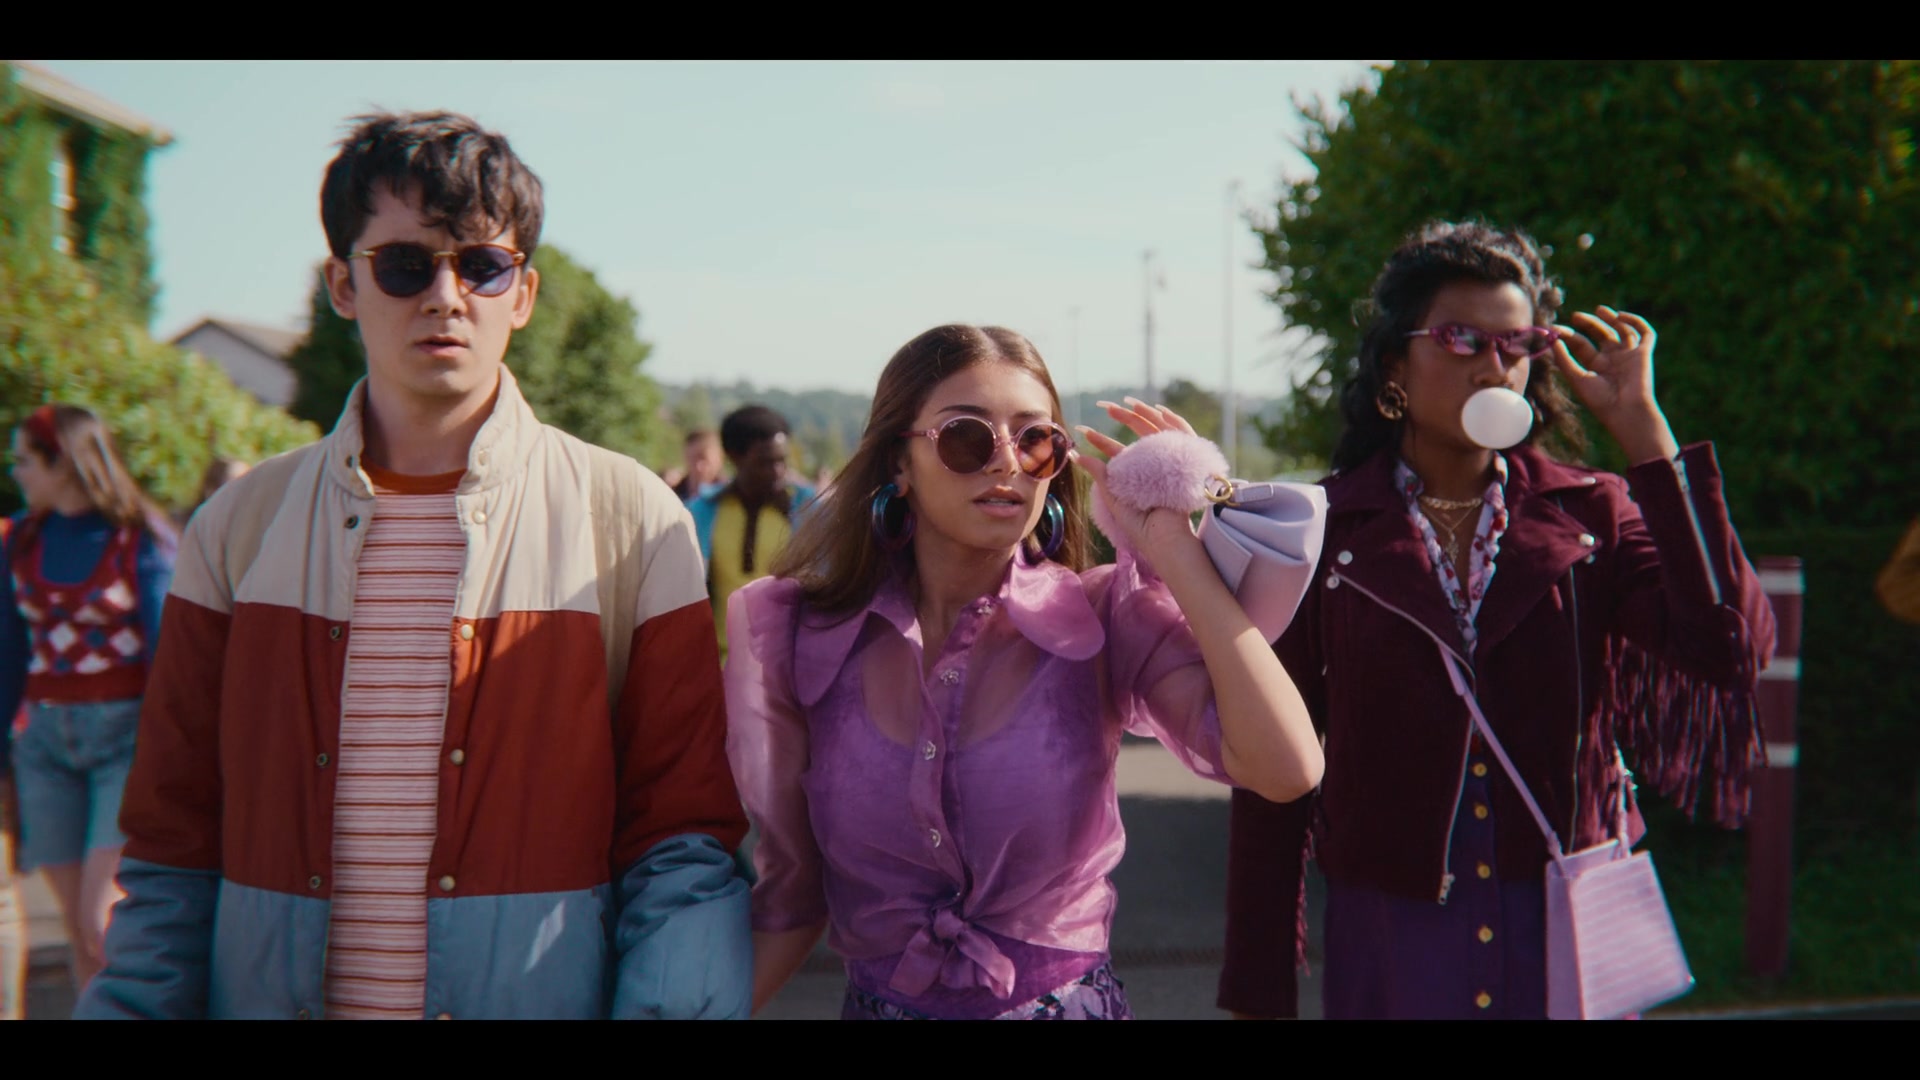 Ray Ban Women's Round Sunglasses Of Mimi Keene As Ruby Matthews In Sex Education S03E02 (2021)